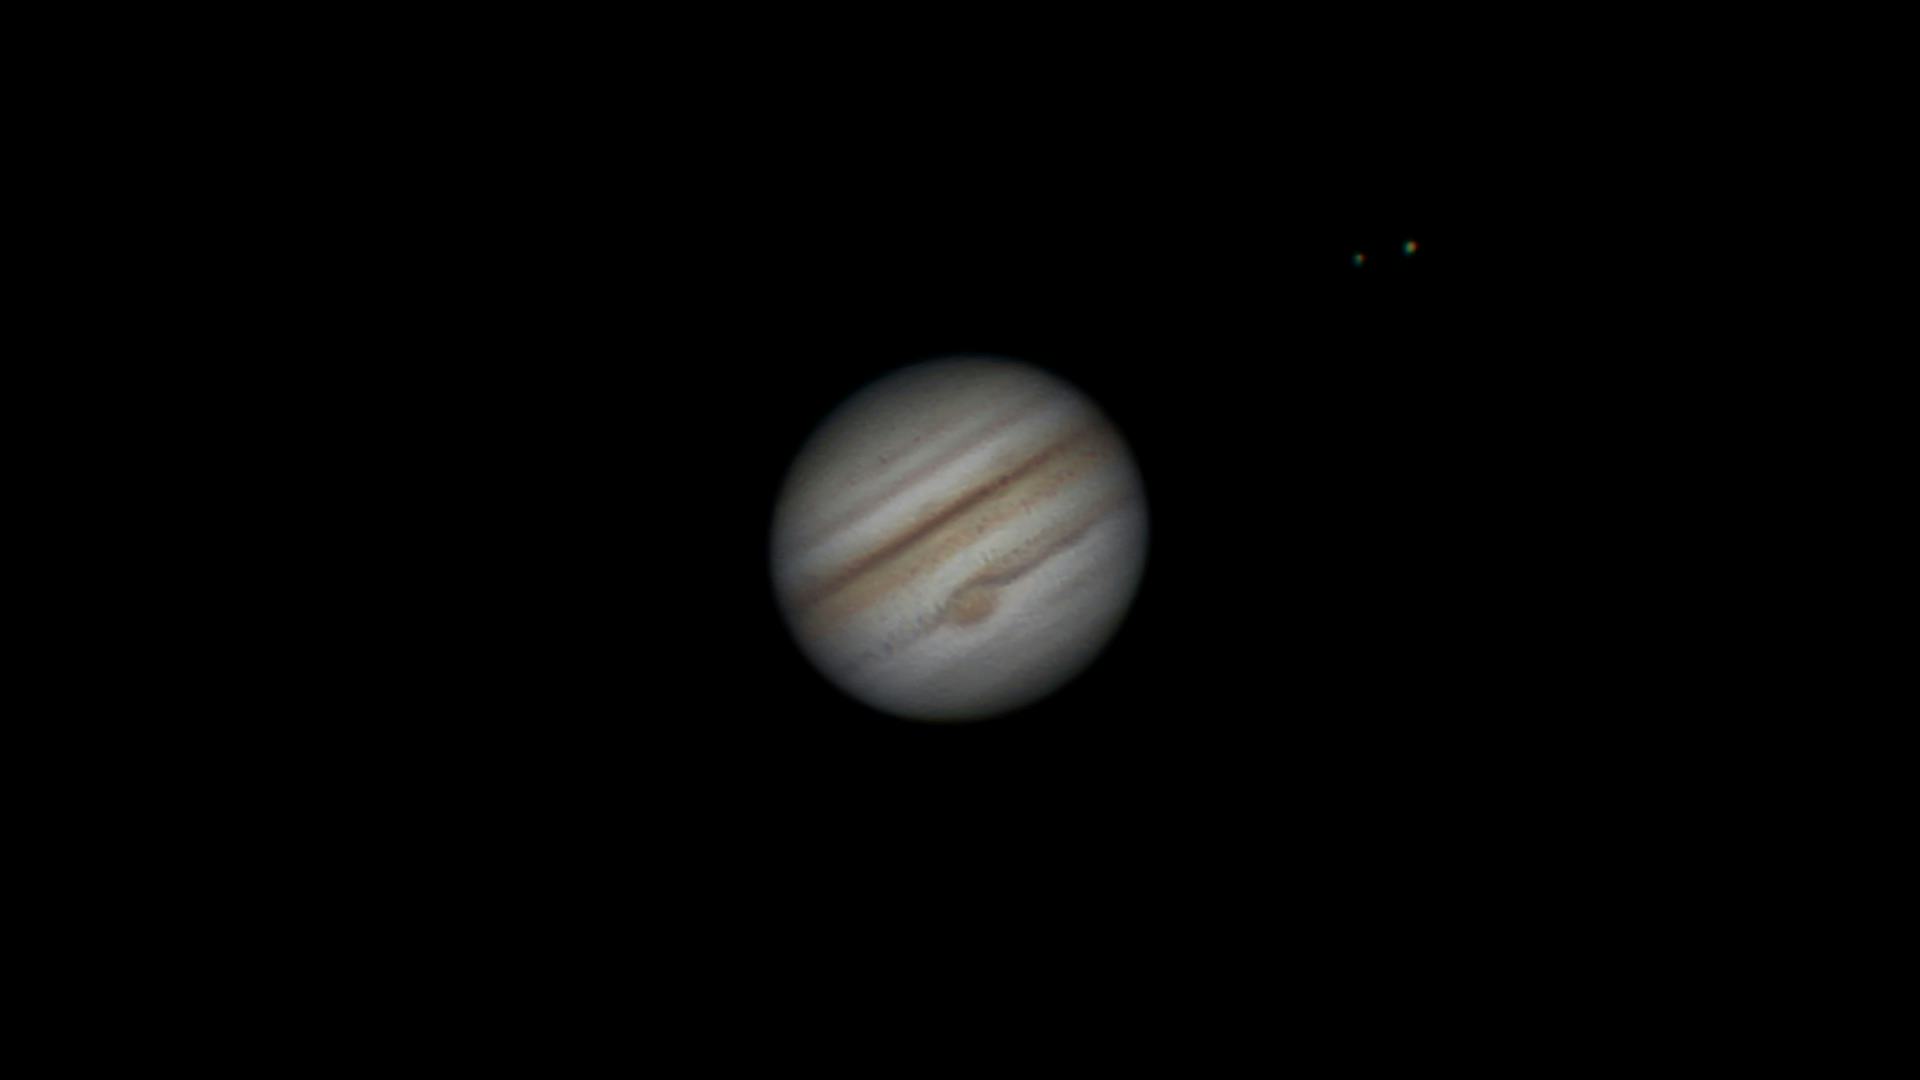 Jupiter, showing its great red spot